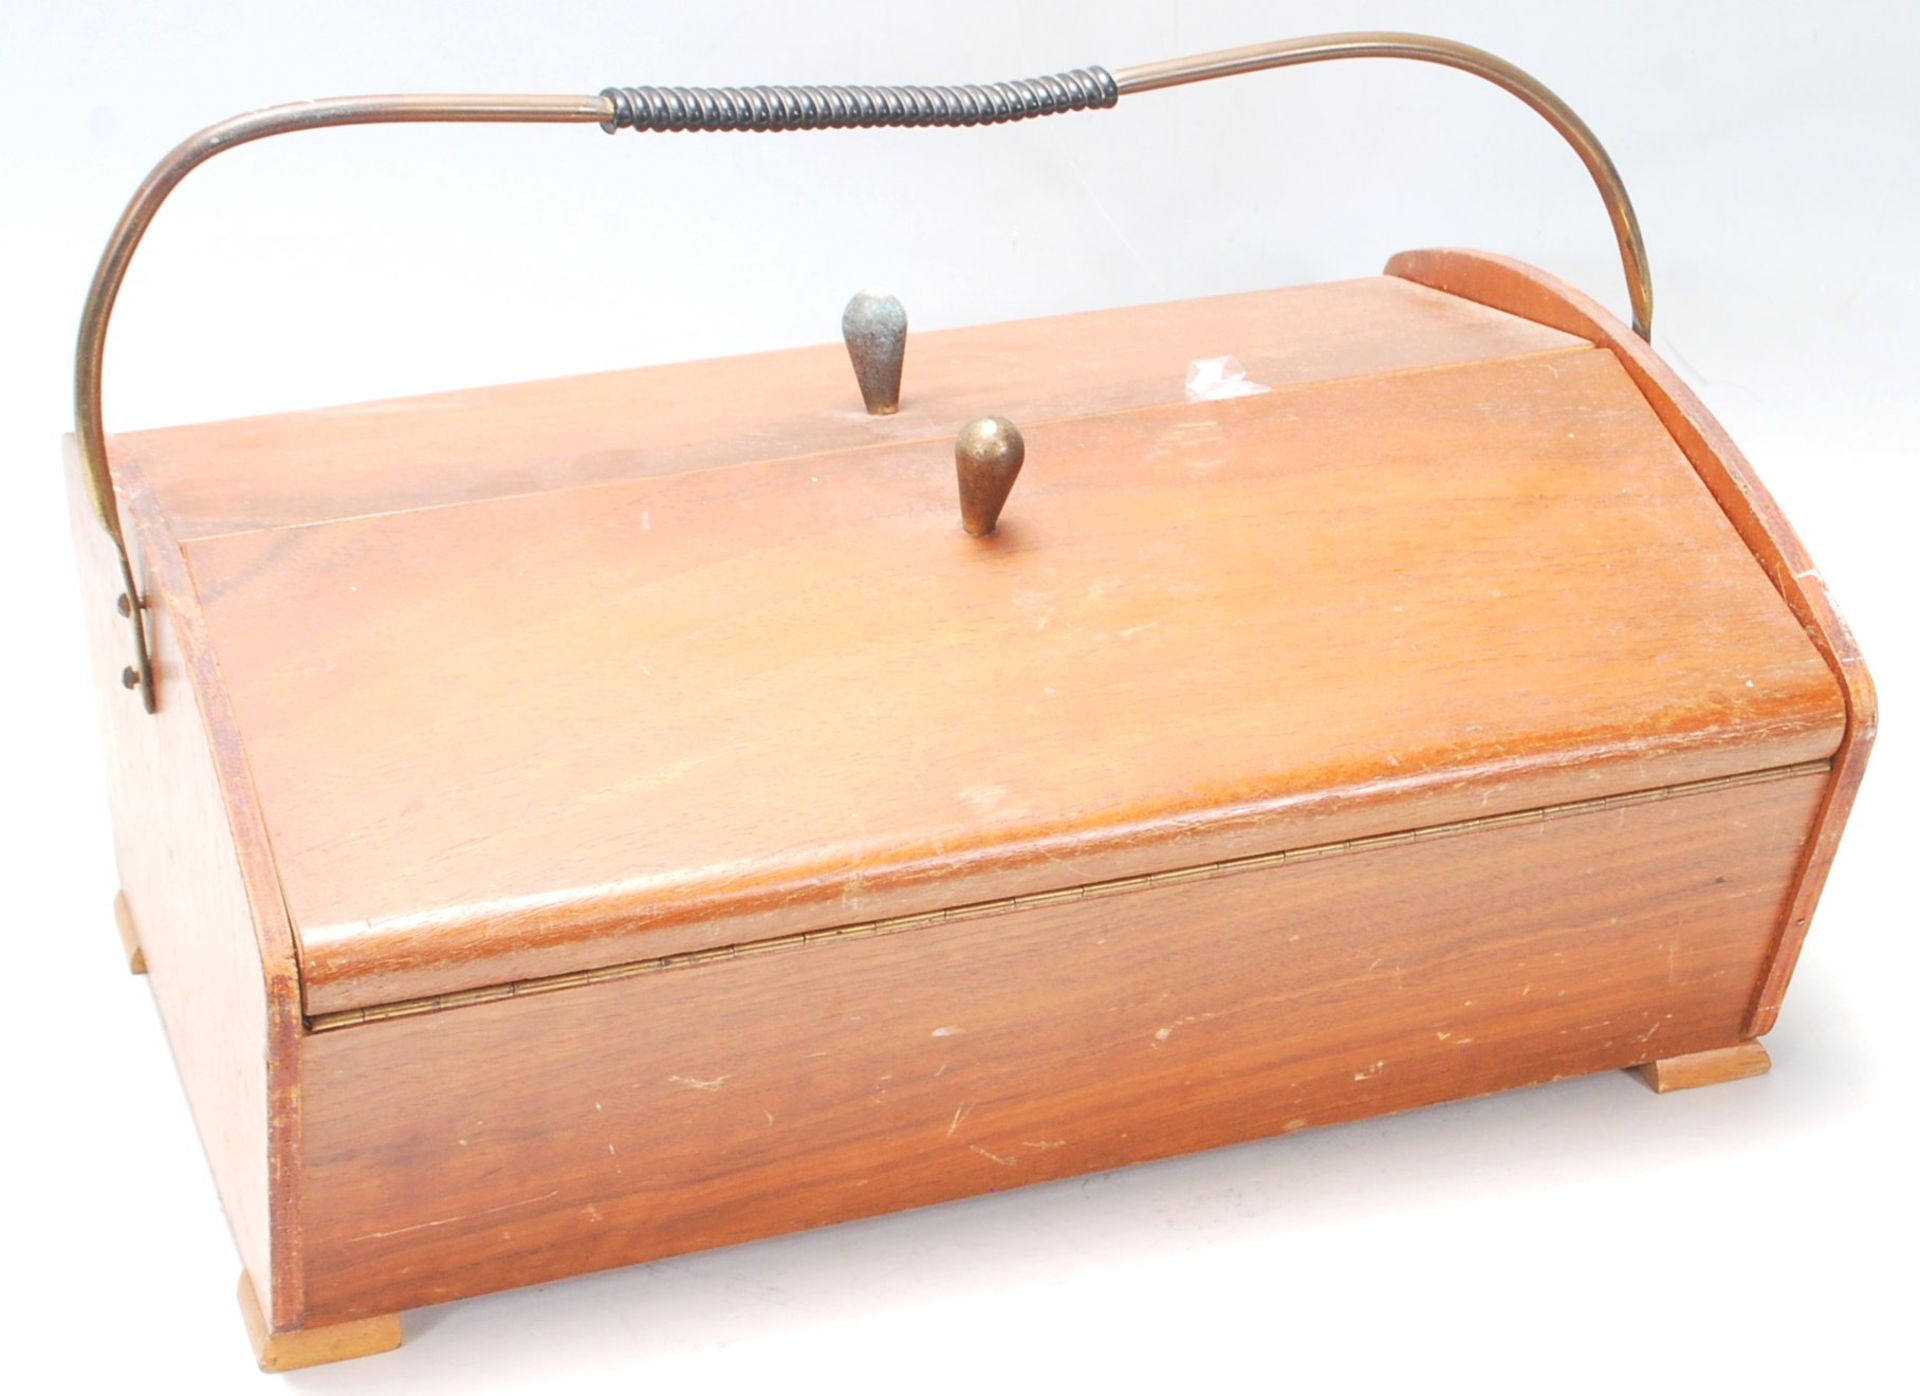 A retro vintage mid 20th century Danish teak sewing box with two flaps opening to reveal a sectional